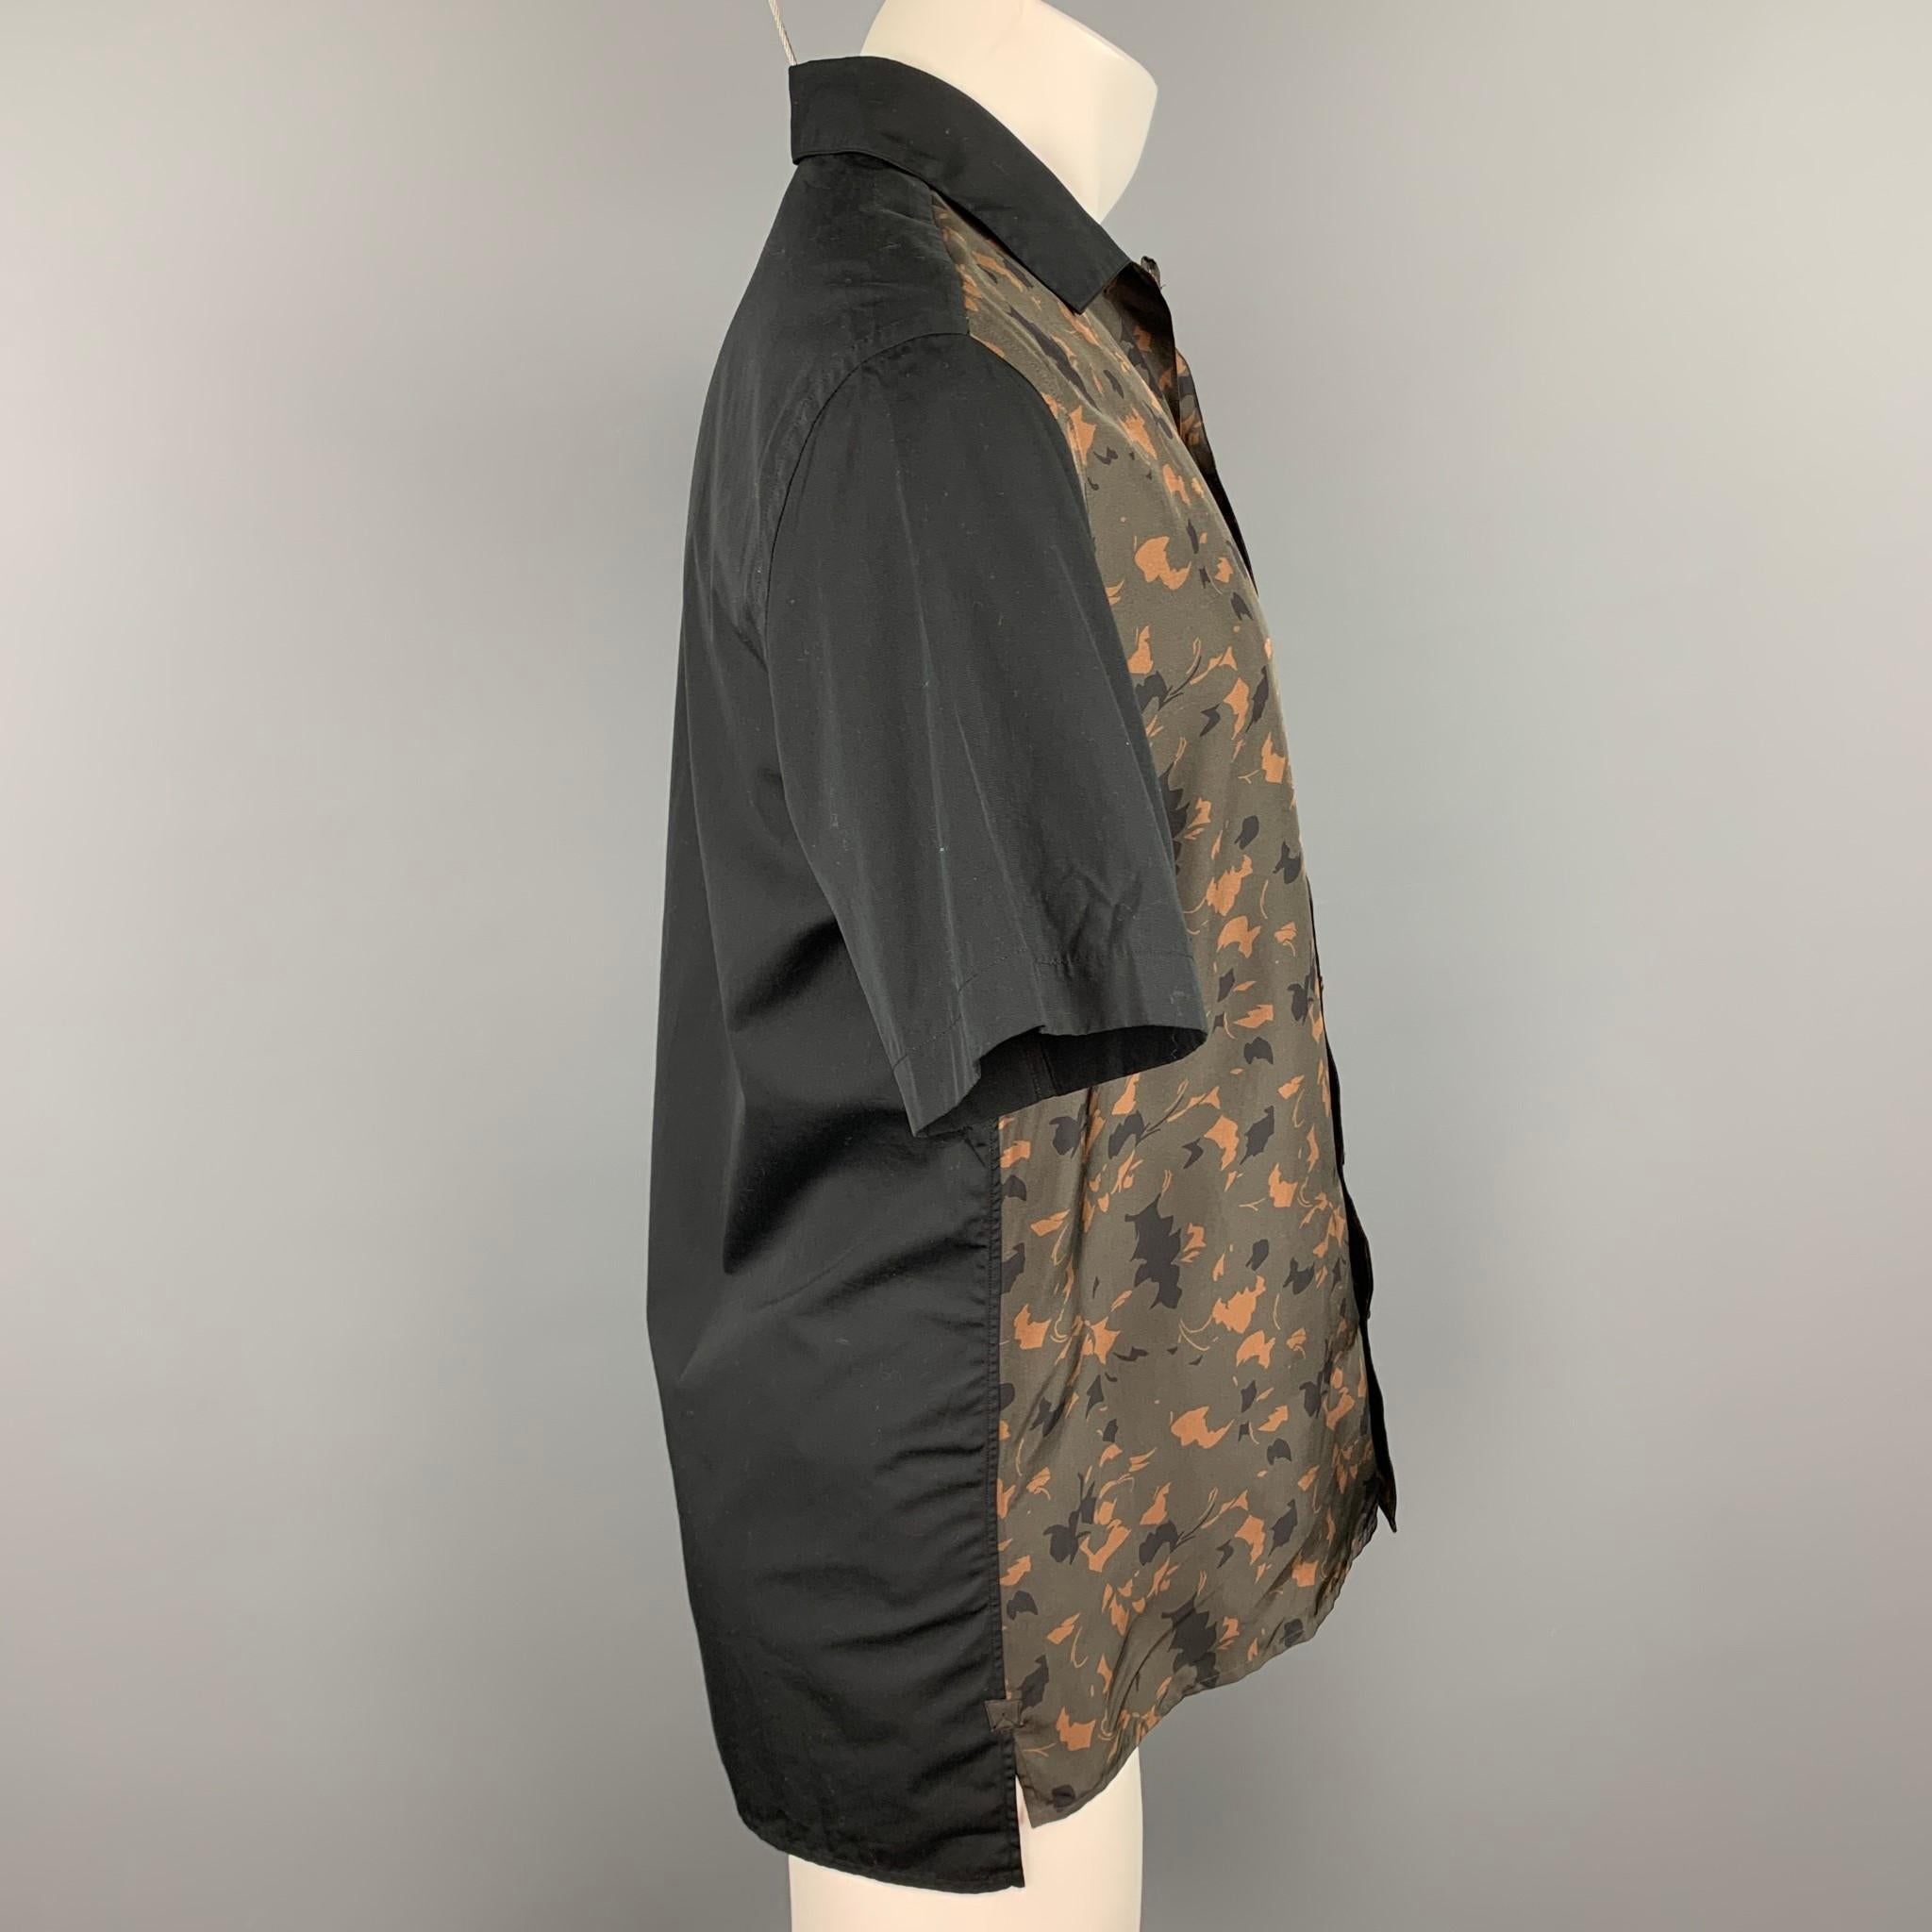 LANVIN short sleeve shirt comes in a black & olive print silk featuring a button up style, front slit pocket, and a spread collar.

New With Tags.
Marked: 38/15

Measurements:

Shoulder: 18.5 in.
Chest: 42 in.
Sleeve: 10 in.
Length: 29.5 in. 